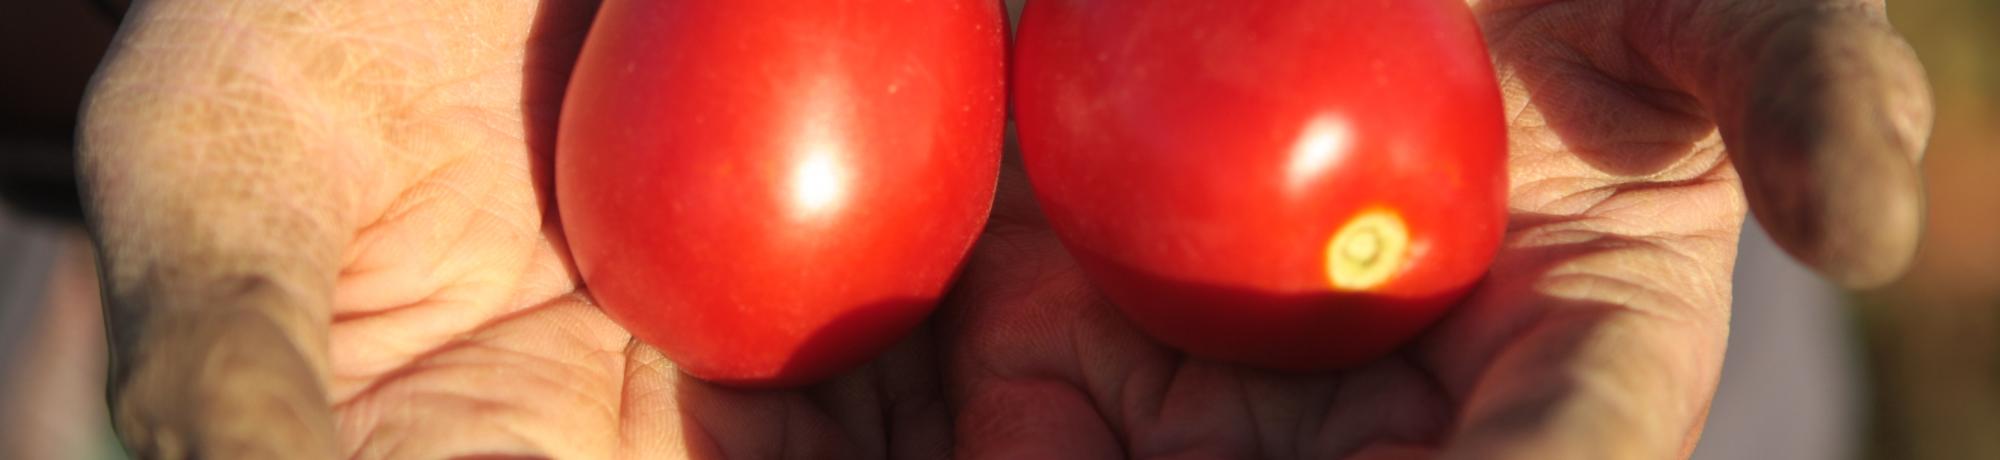 Hands with tomatoes